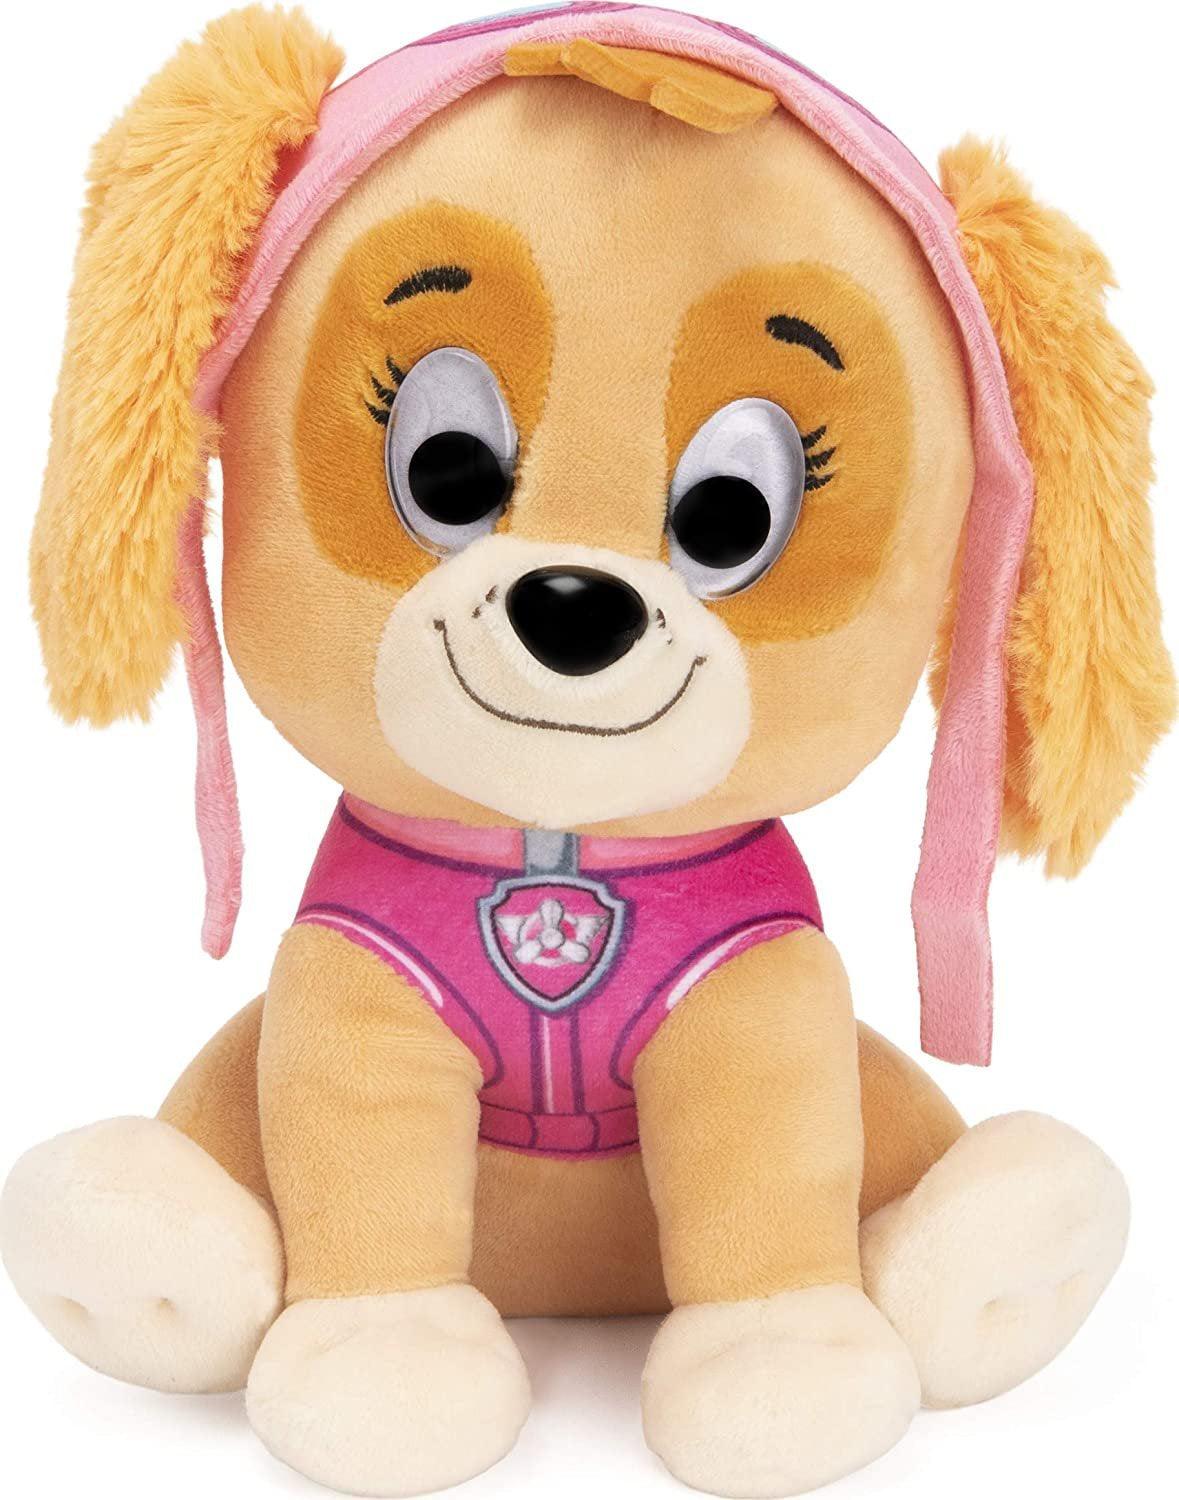 Paw Patrol Skye in Signature Aviator Pilot Uniform for Ages 1 and Up, 9"